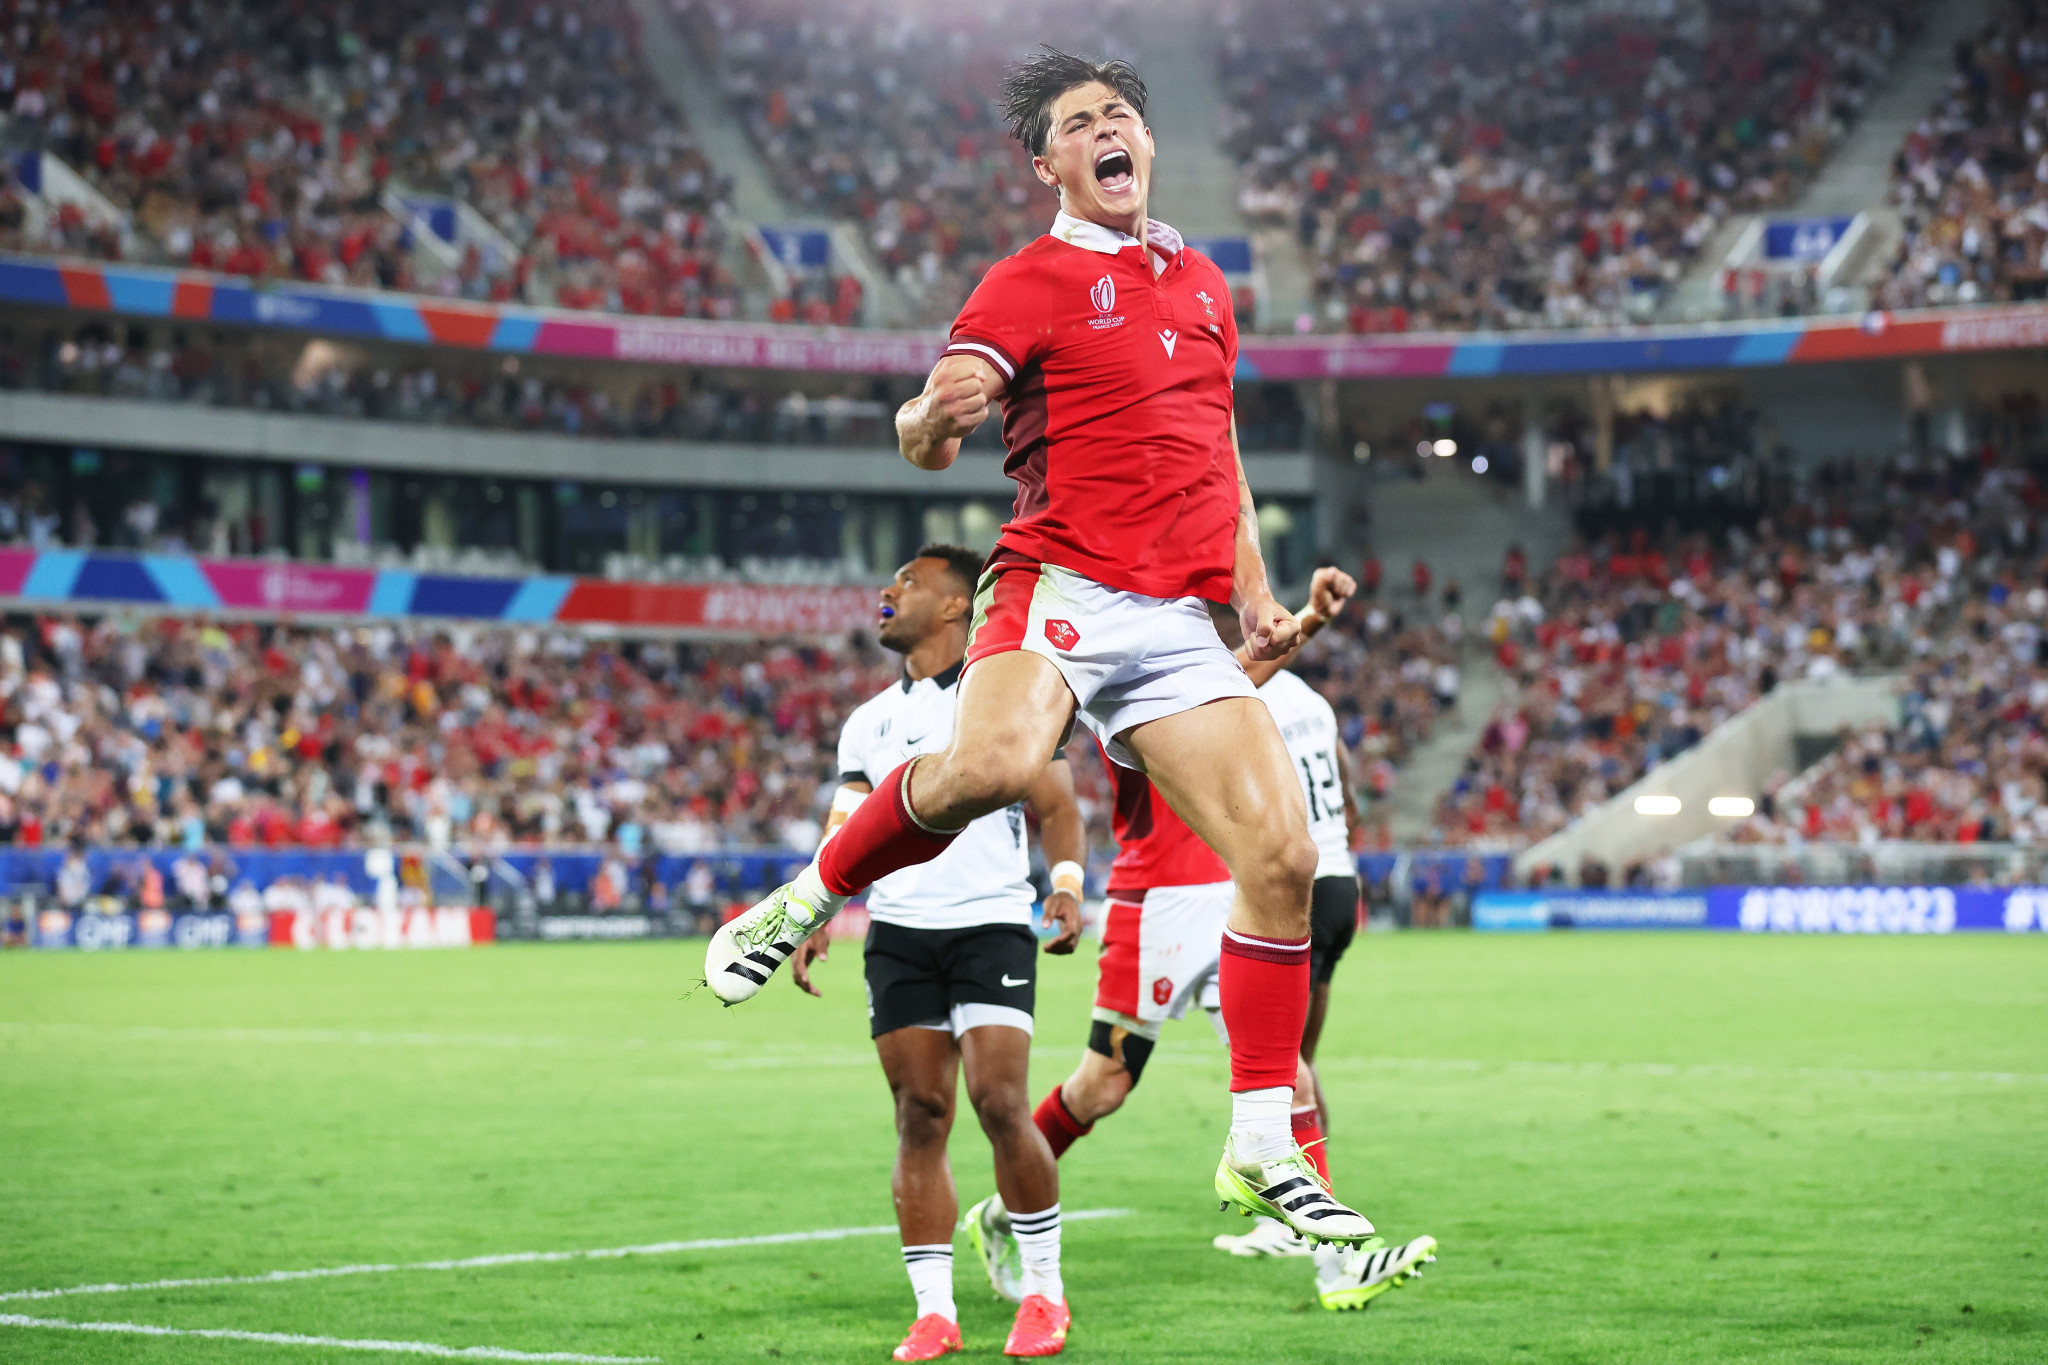 Wales withstand late Fiji fightback to win Rugby World Cup opener